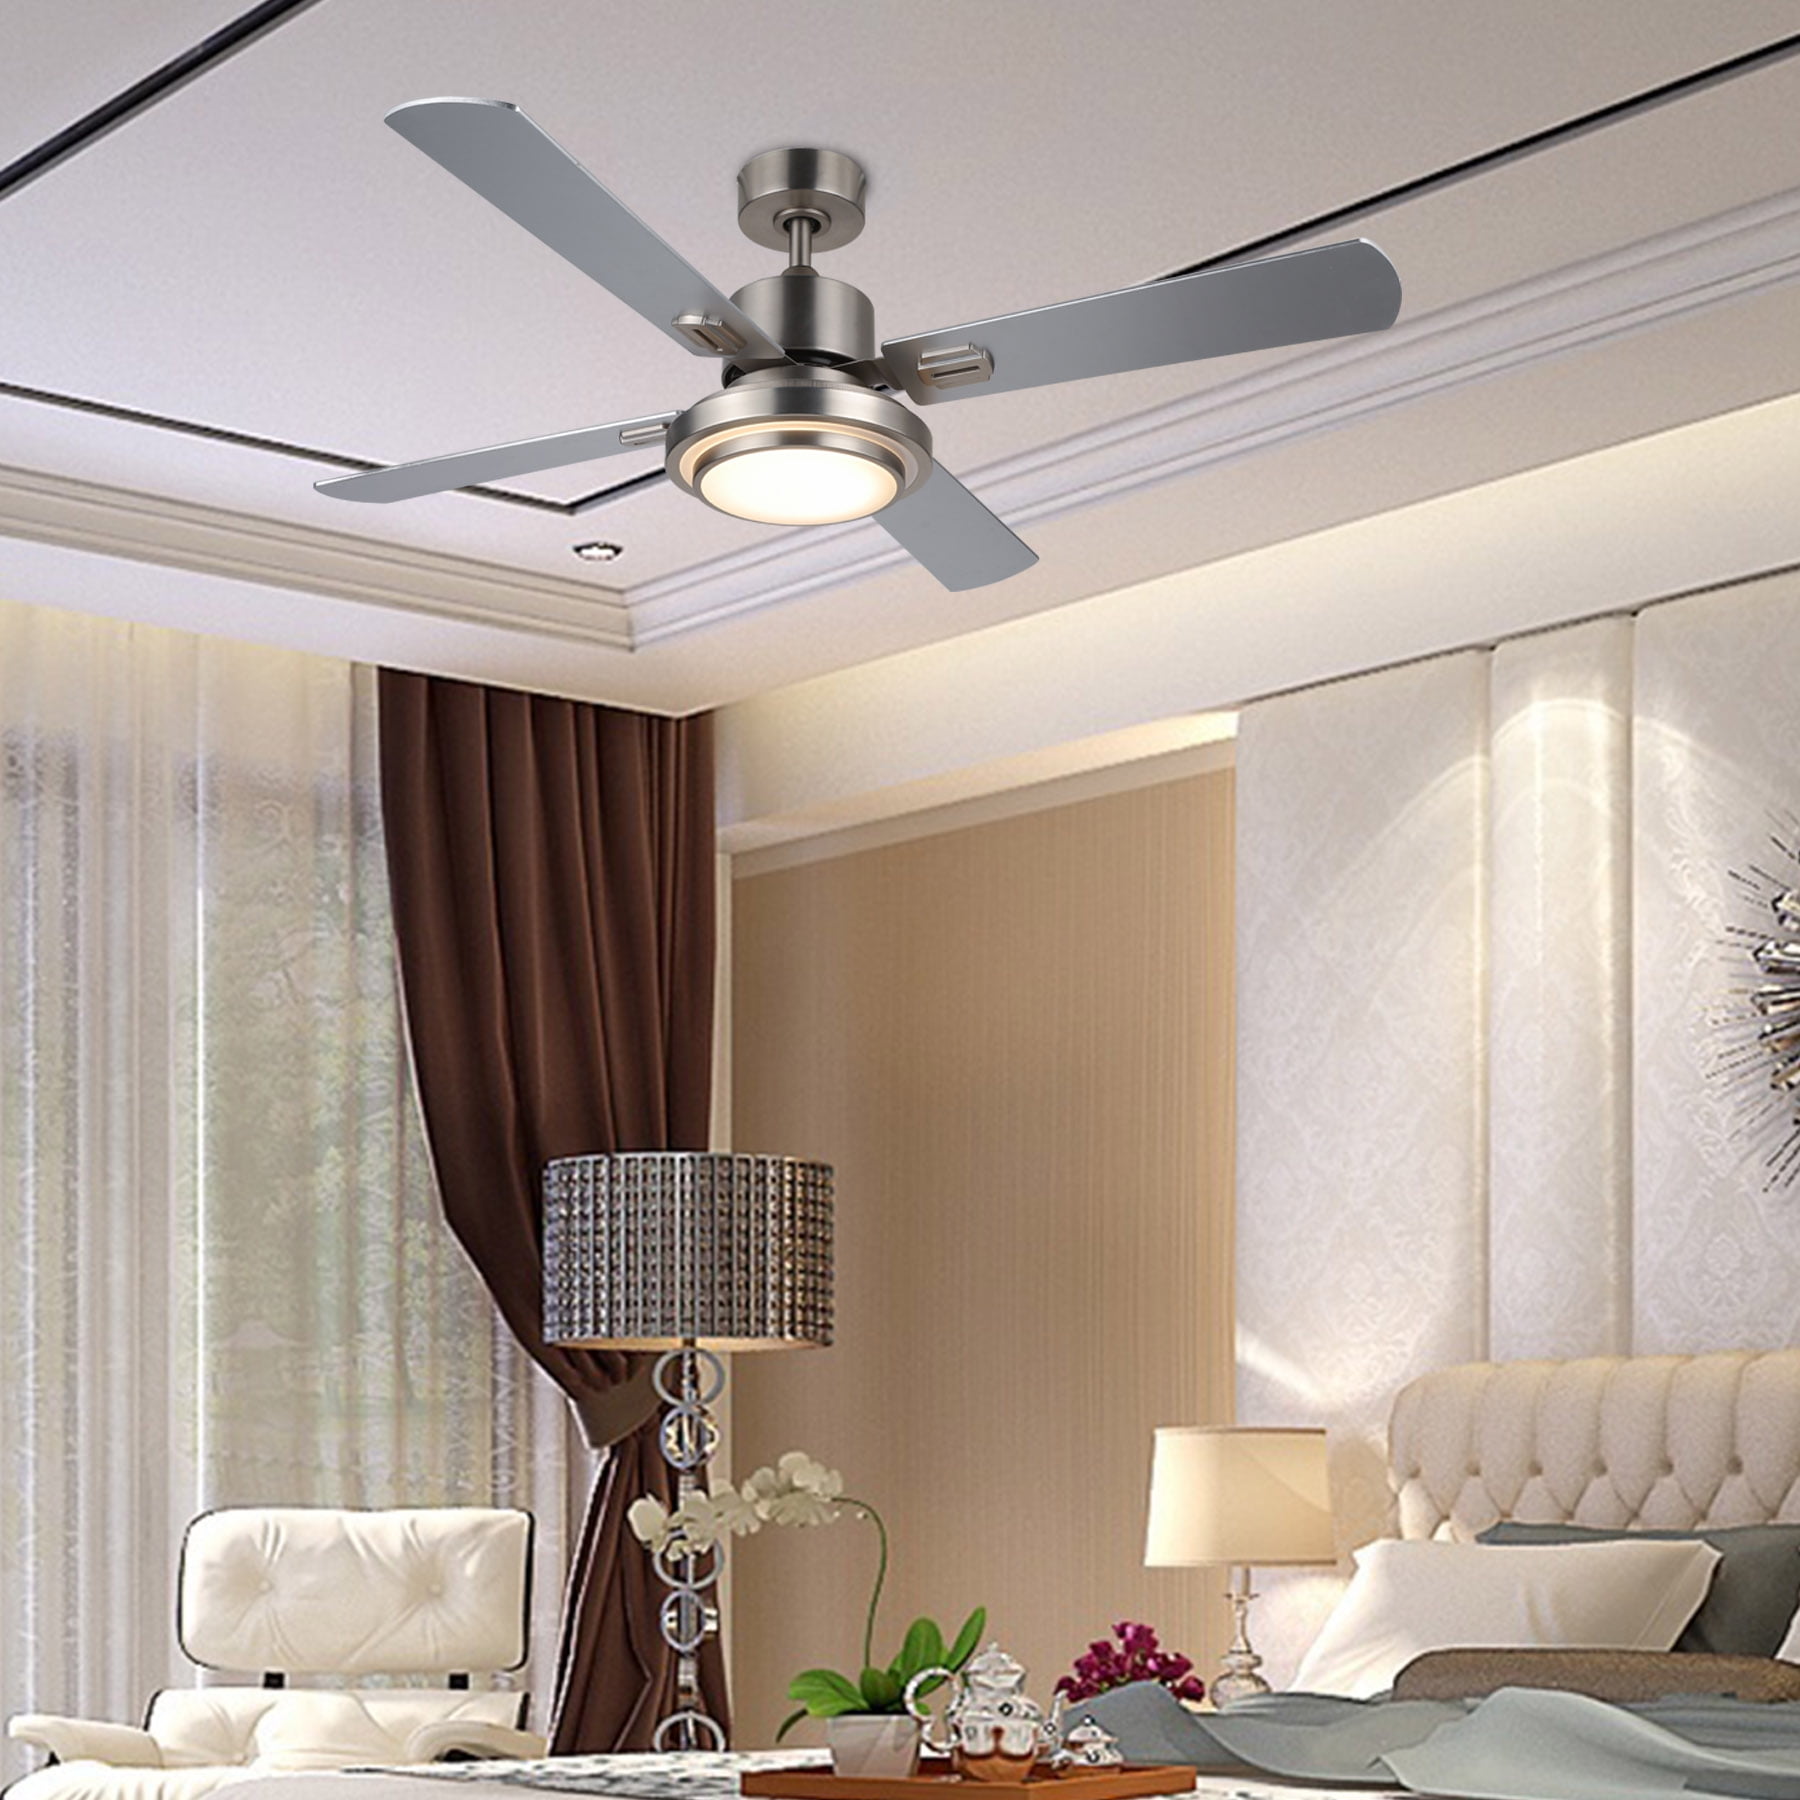 52" Low Profile Brushed Nickel Ceiling Fan with Light & Remote UL Listed 